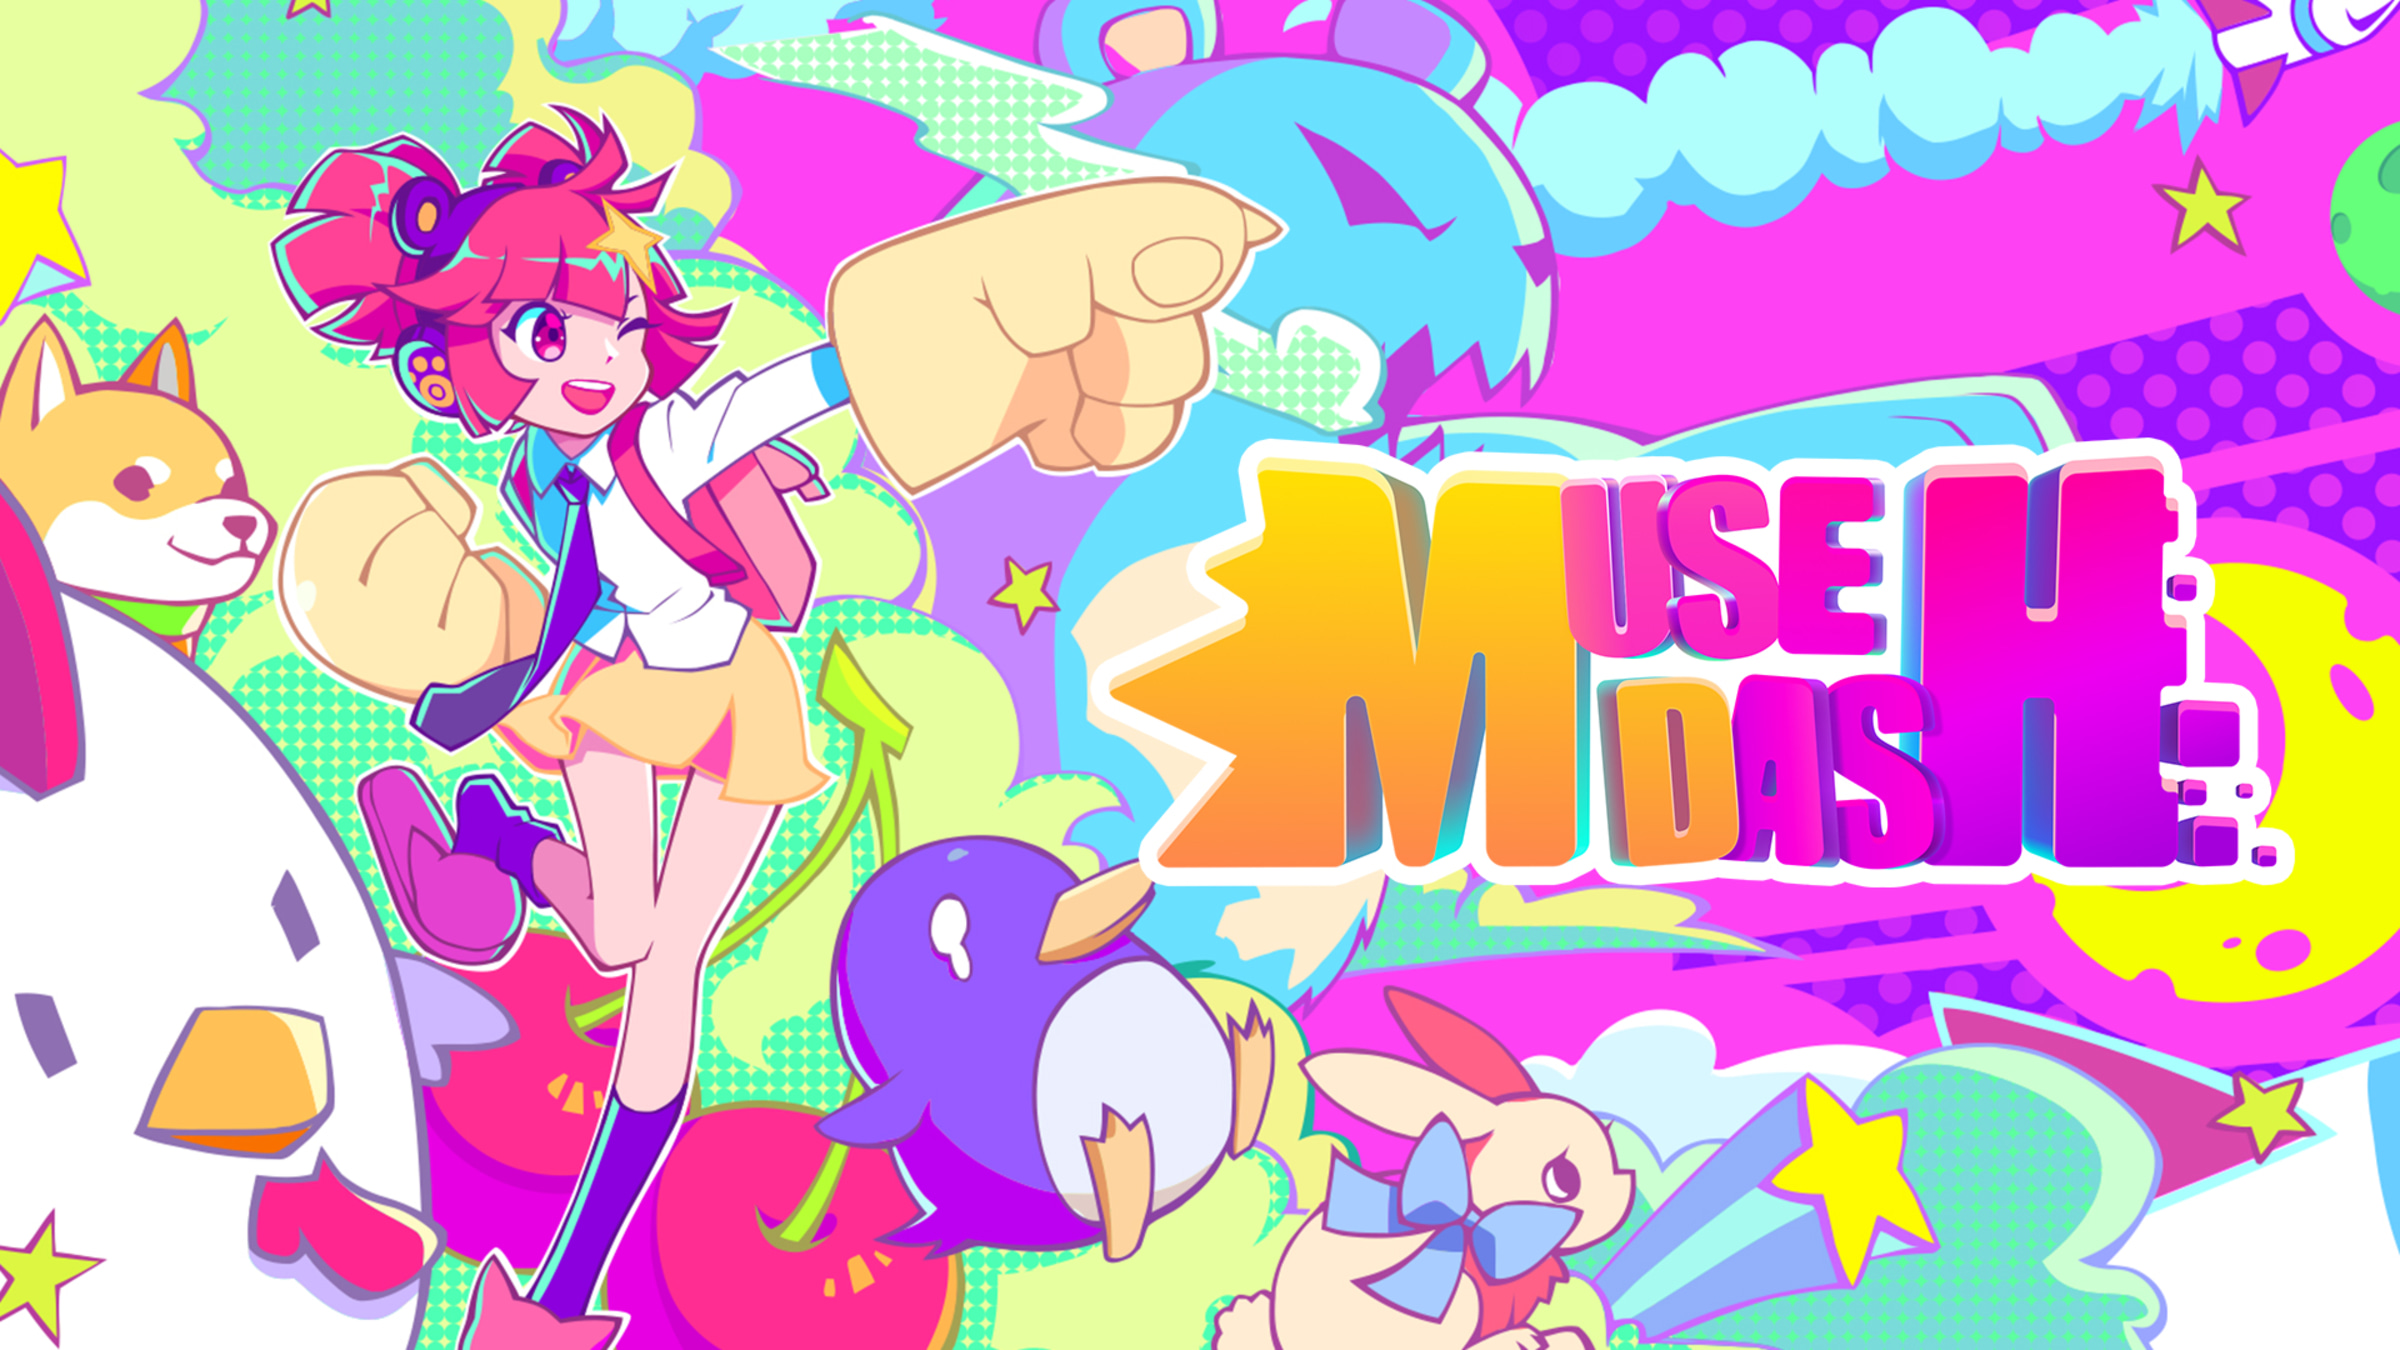 Muse Dash for Nintendo Switch - Nintendo Official Site